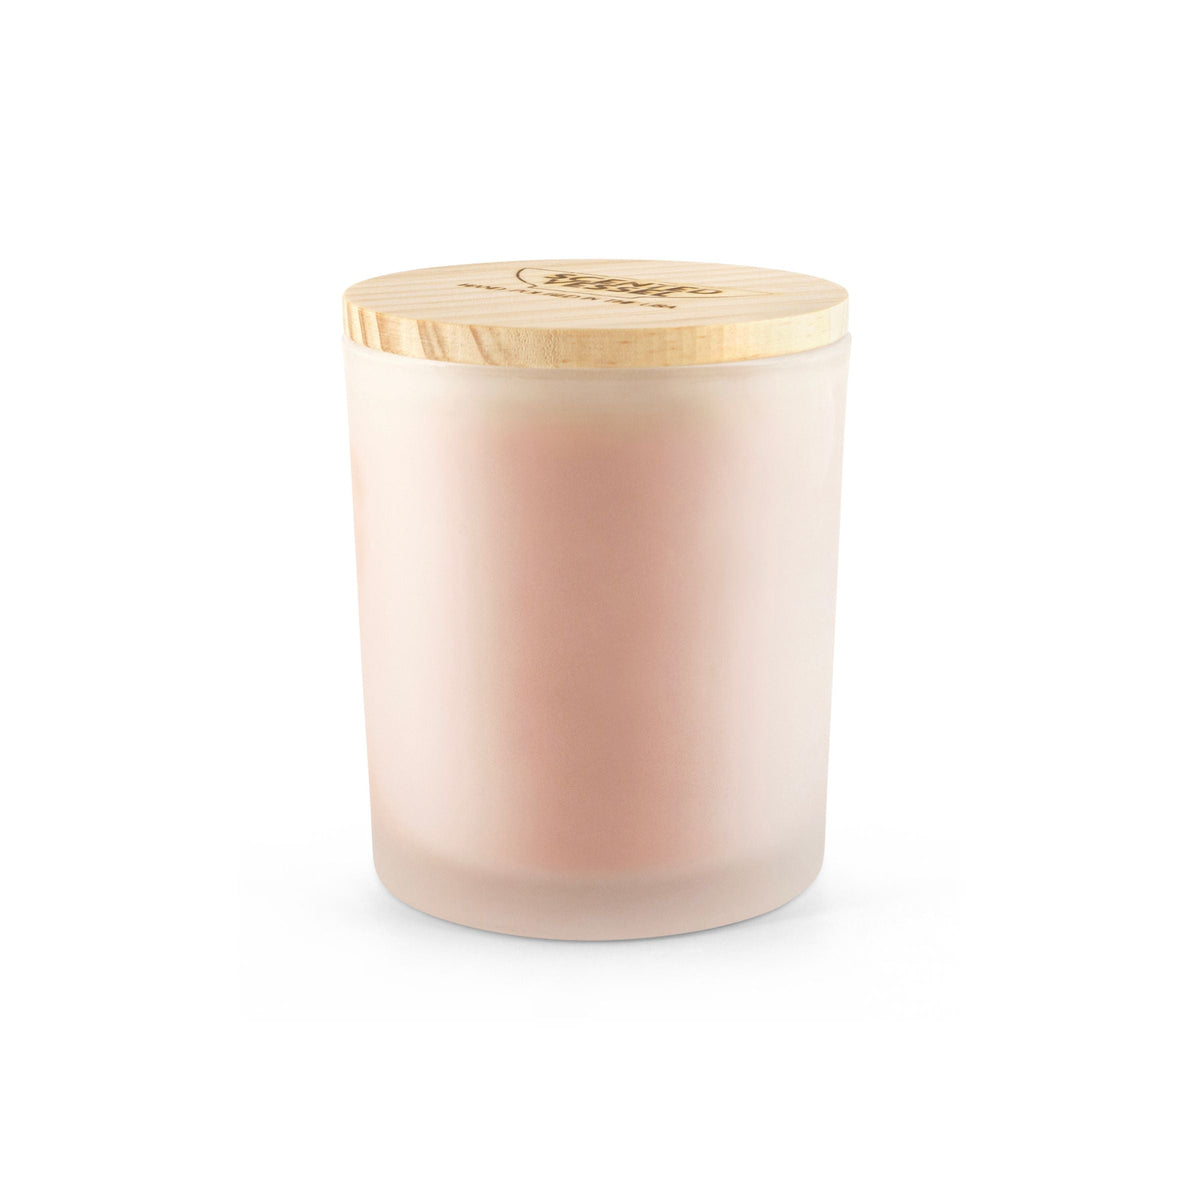 Cinnamon Sticks 7.5oz Frosted Jar Candle by Scented Vessel